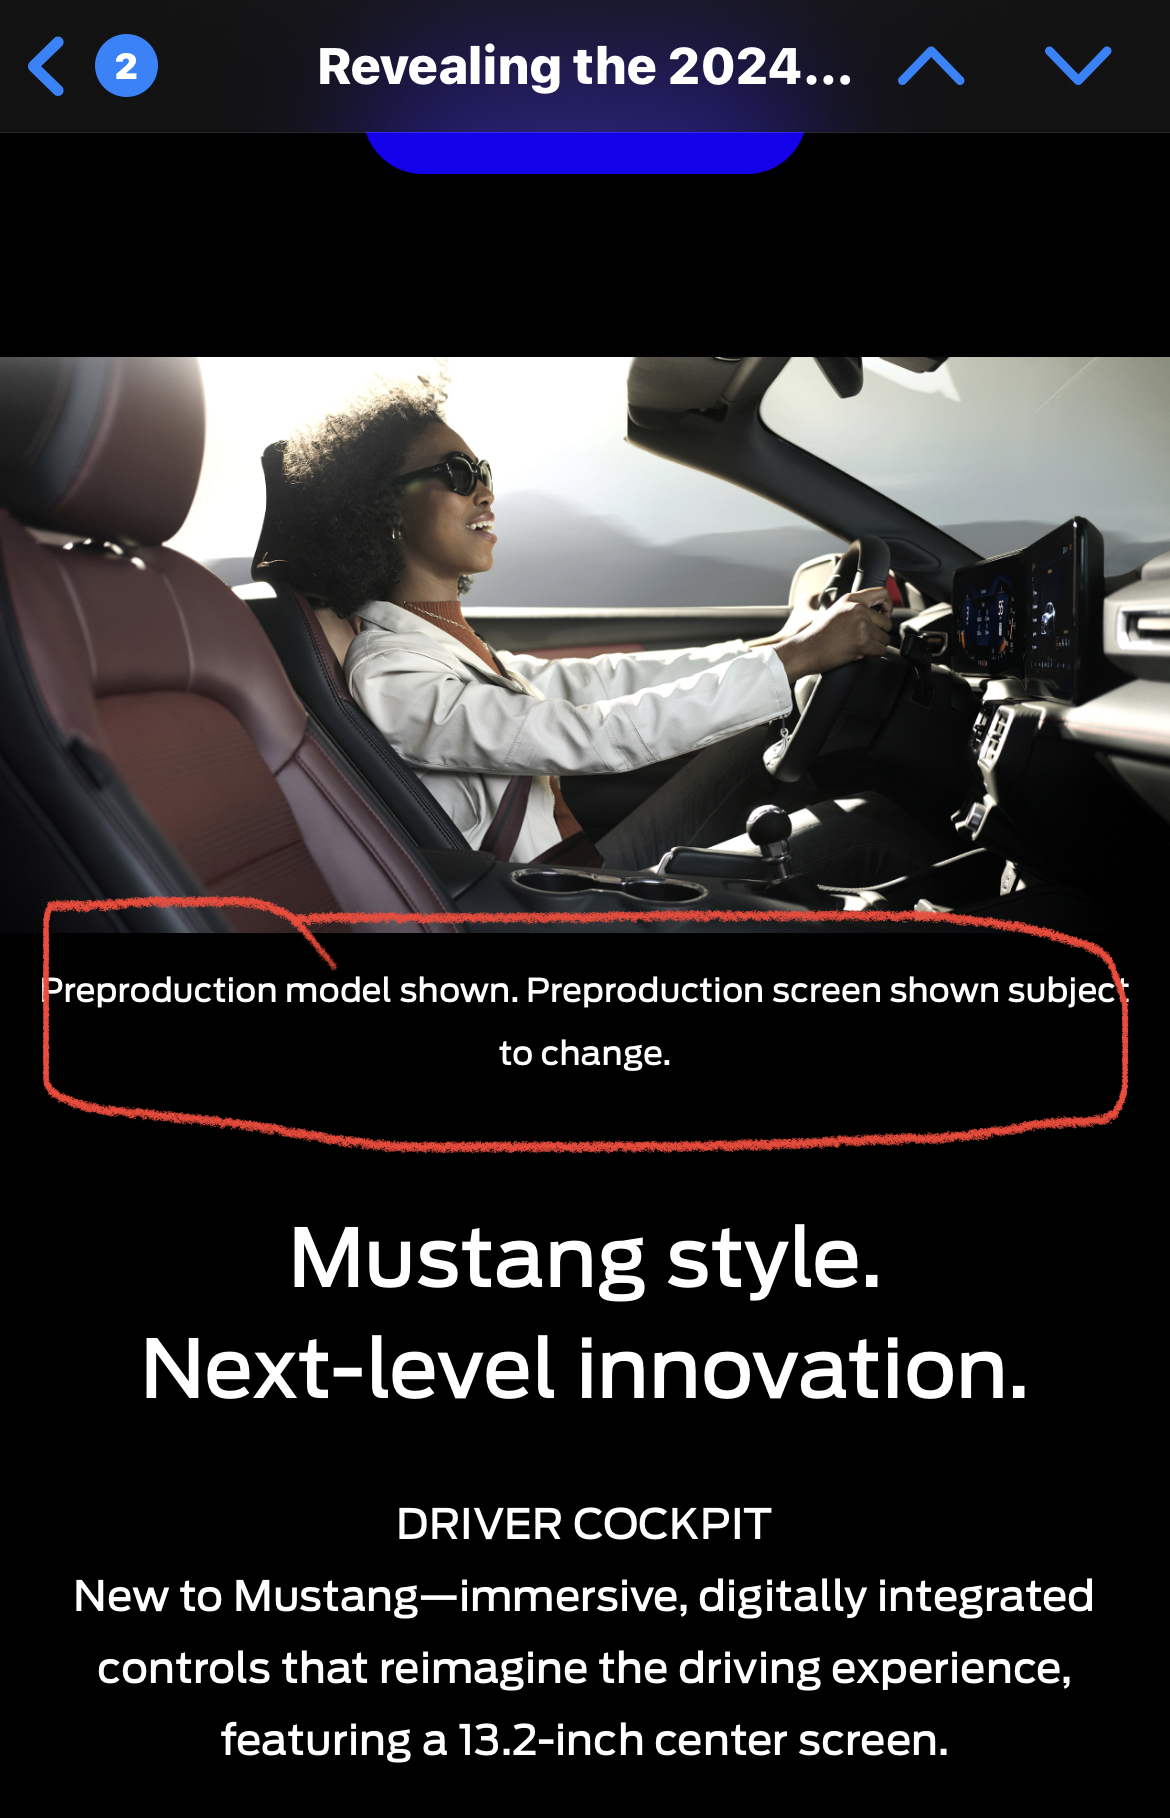 S650 Mustang The new dashboard is a big mistake IMO CD204EA3-95F3-4020-9DF7-07CF2C5F9977